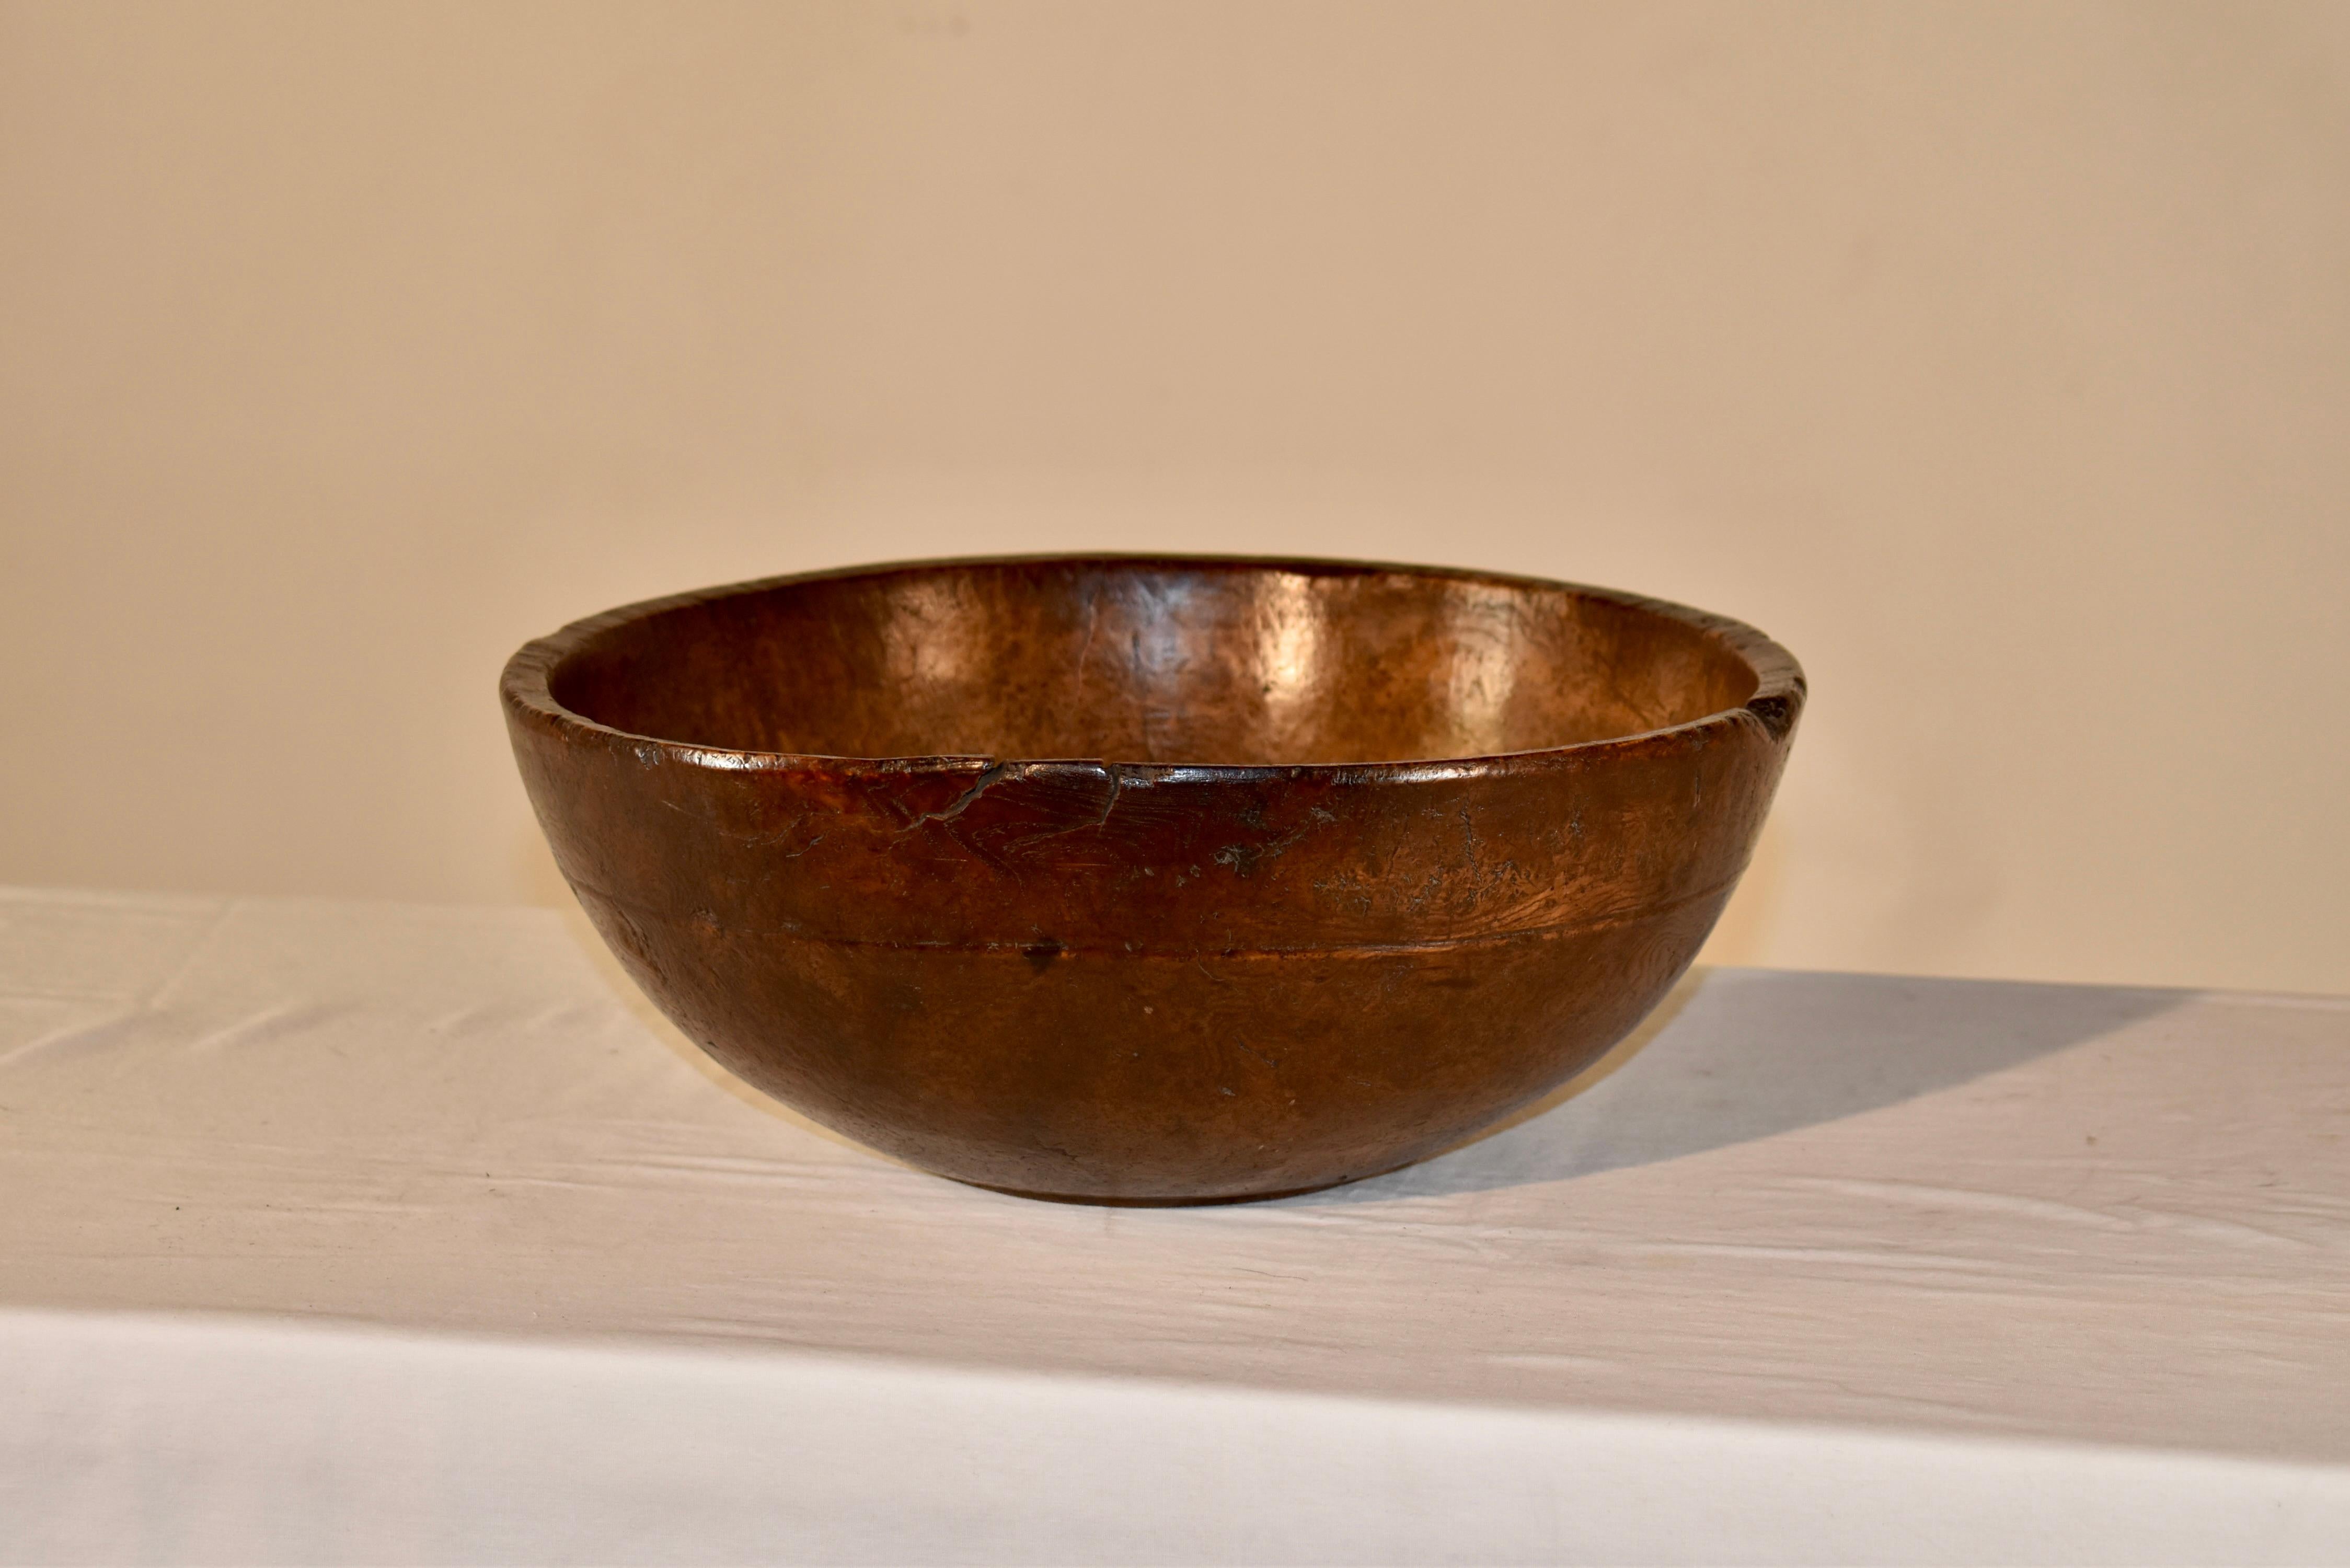 RARE 18th century hand turned burl wood bowl from the early period of the American Colonies, soon after to be known as the United States of America.  This is a wonderful piece of American history that can be appreciated and cherished for the next